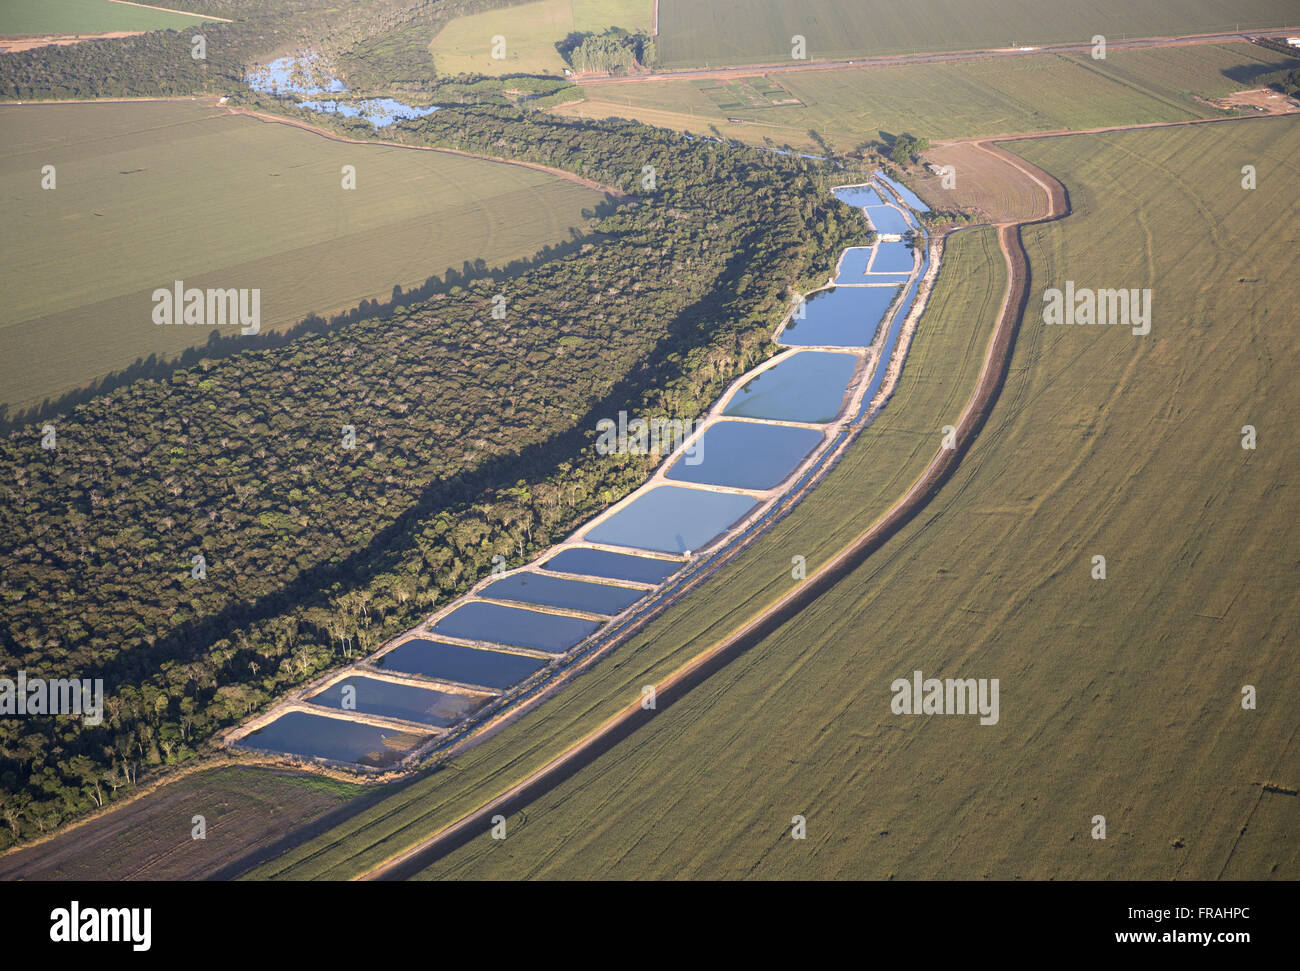 Aerial view of road crossing maize plantation in the countryside Stock Photo